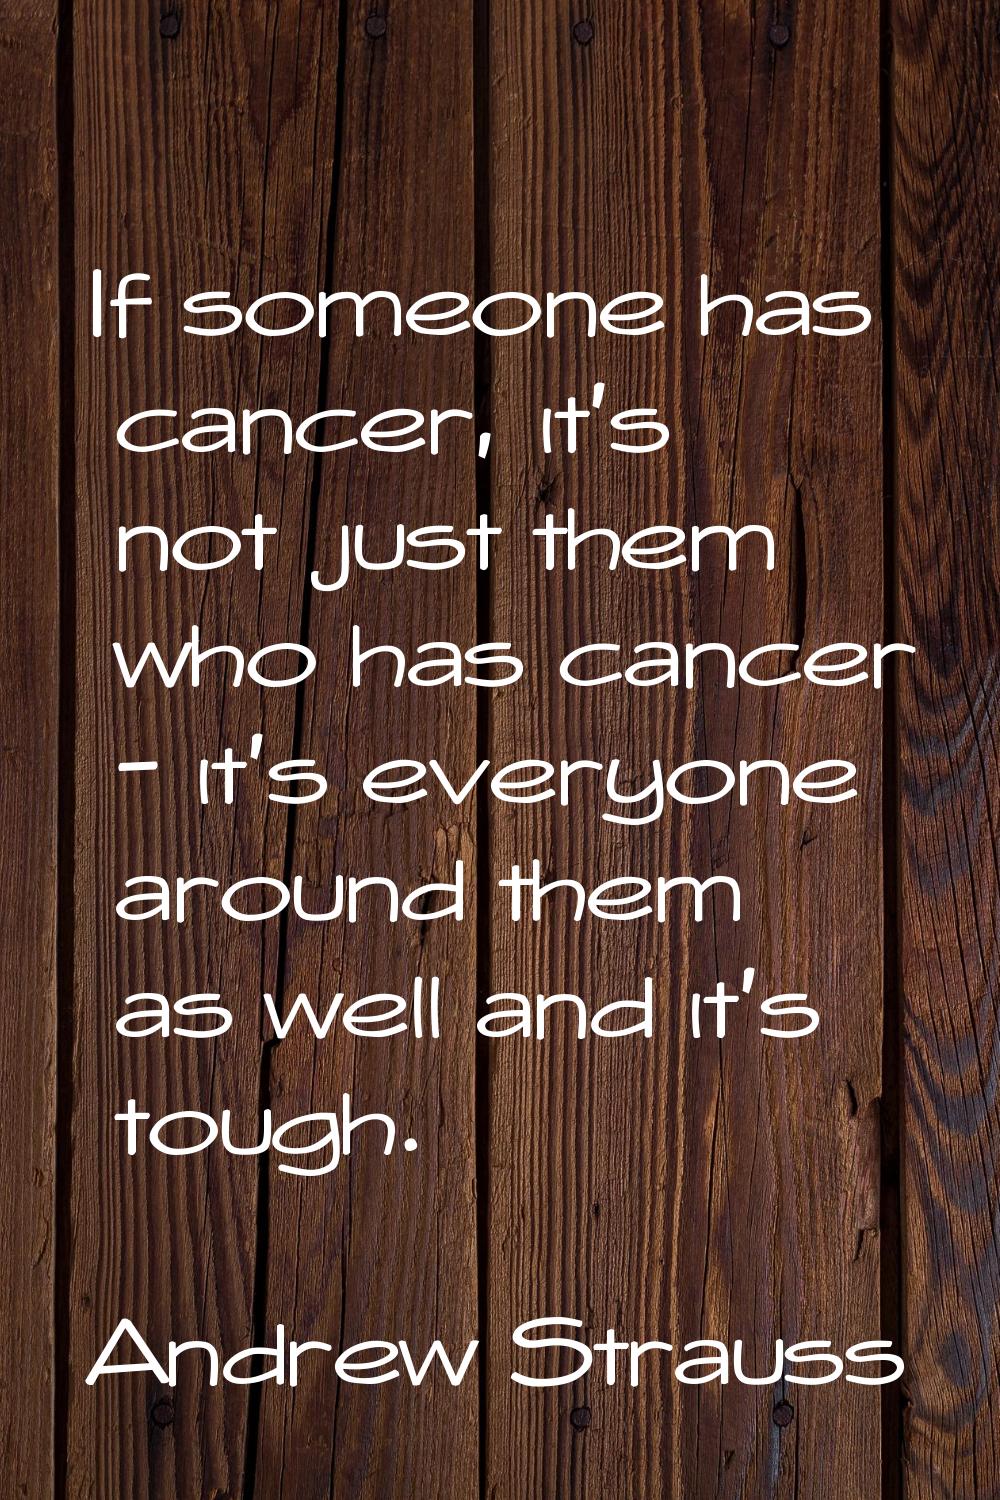 If someone has cancer, it's not just them who has cancer - it's everyone around them as well and it